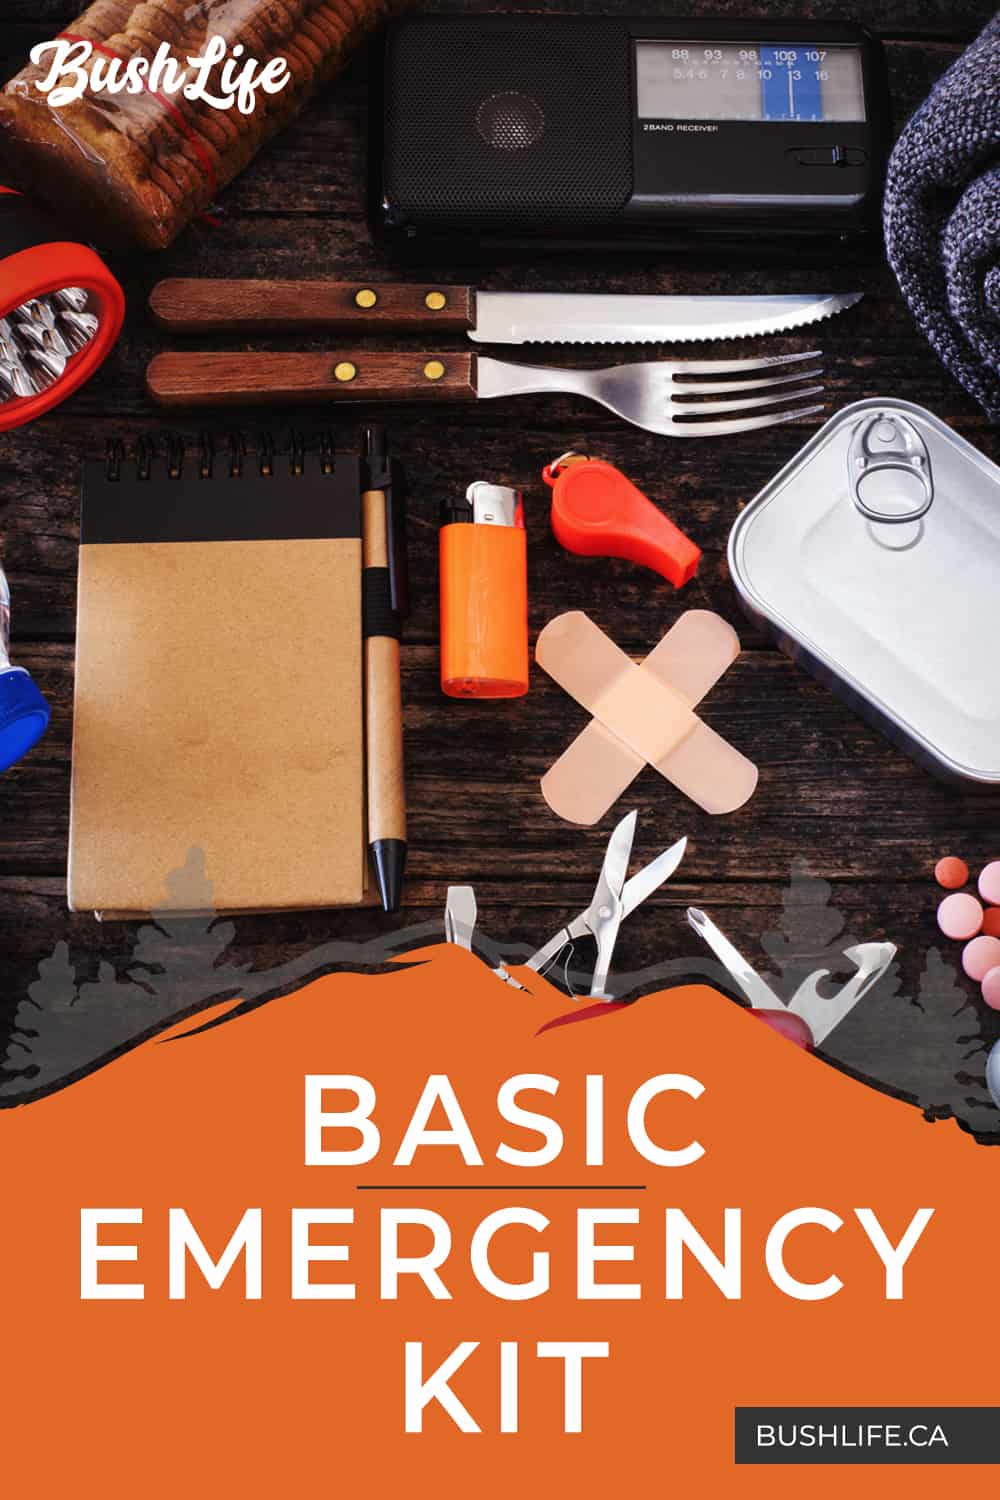 Basic Emergency Kit: Security for Your Family Starts HERE